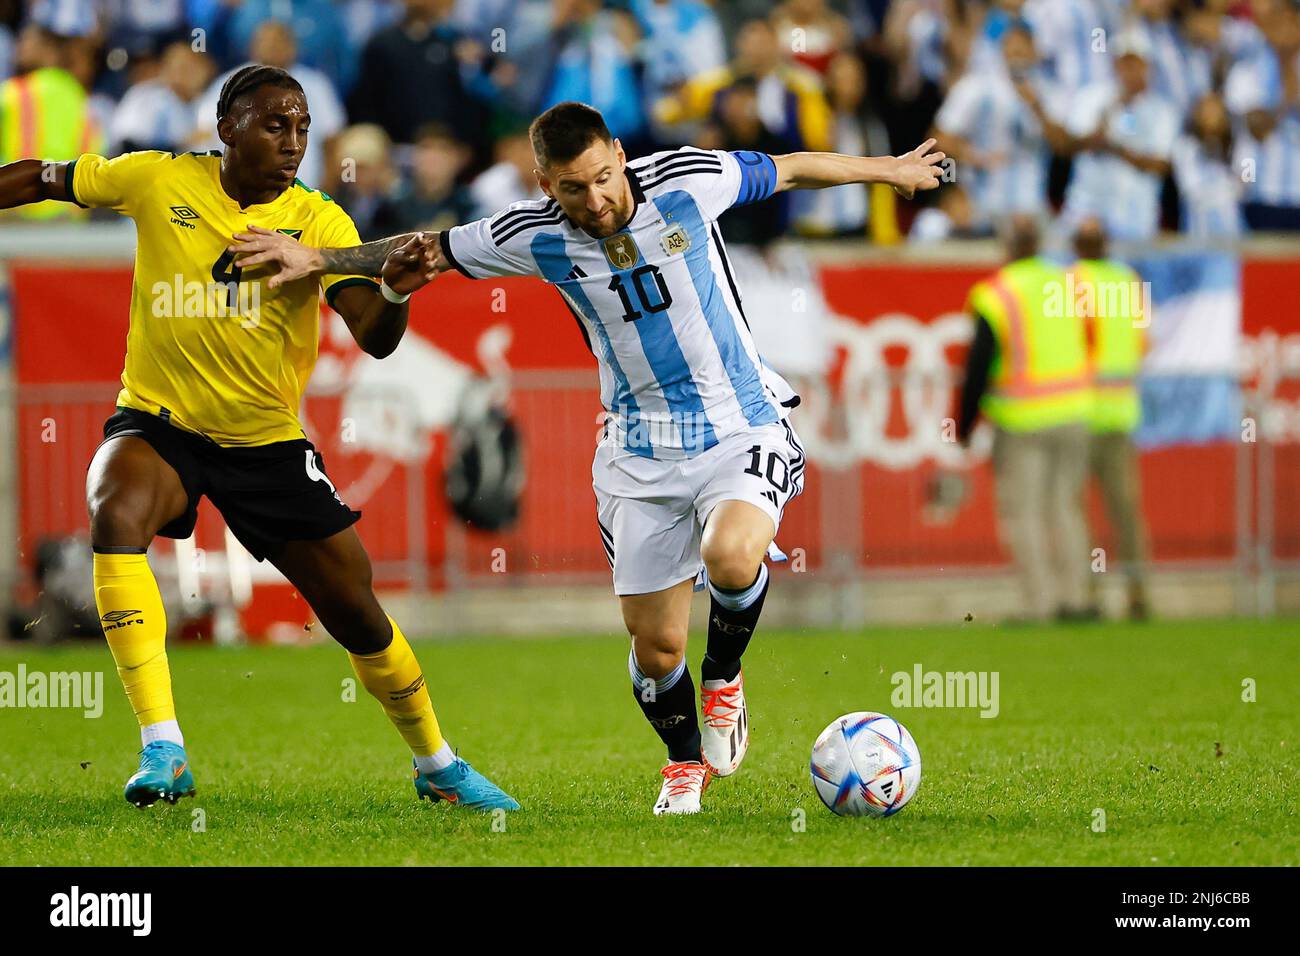 HARRISON, NJ - SEPTEMBER 27: Argentina forward Lionel Messi (10) controls  the ball during the international friendly soccer game between Argentina  and Jamaica on September 27, 2022 at Red Bull Arena in